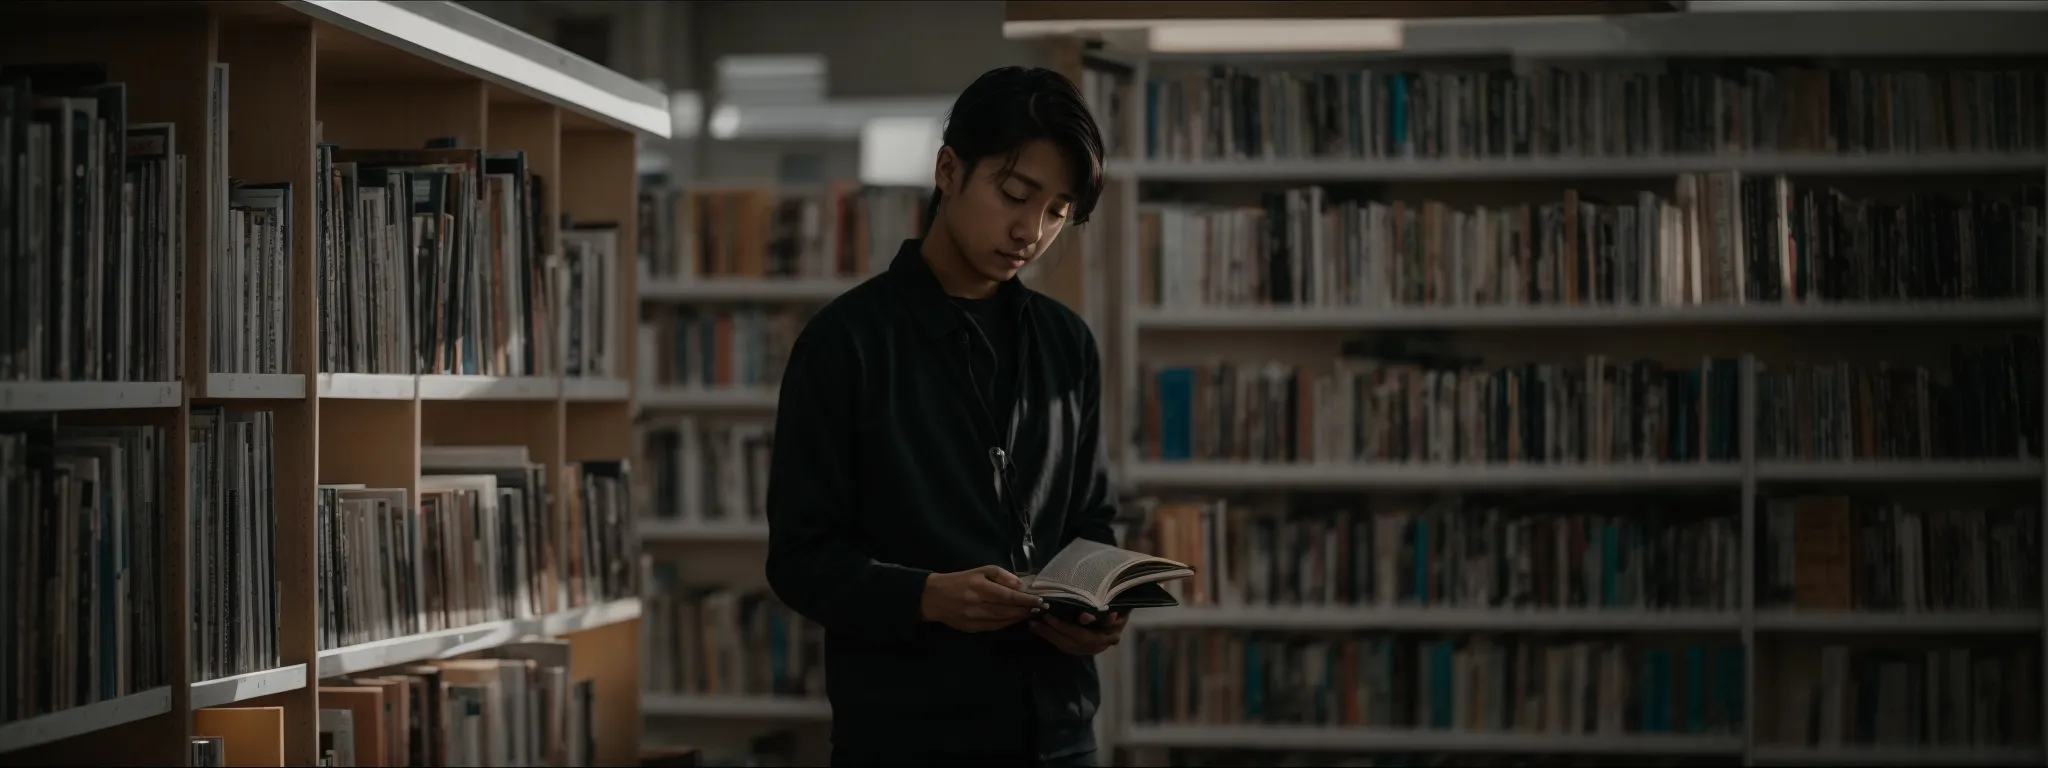 a person intently reading an open book nestled among the quiet shelves of a sunlit library.